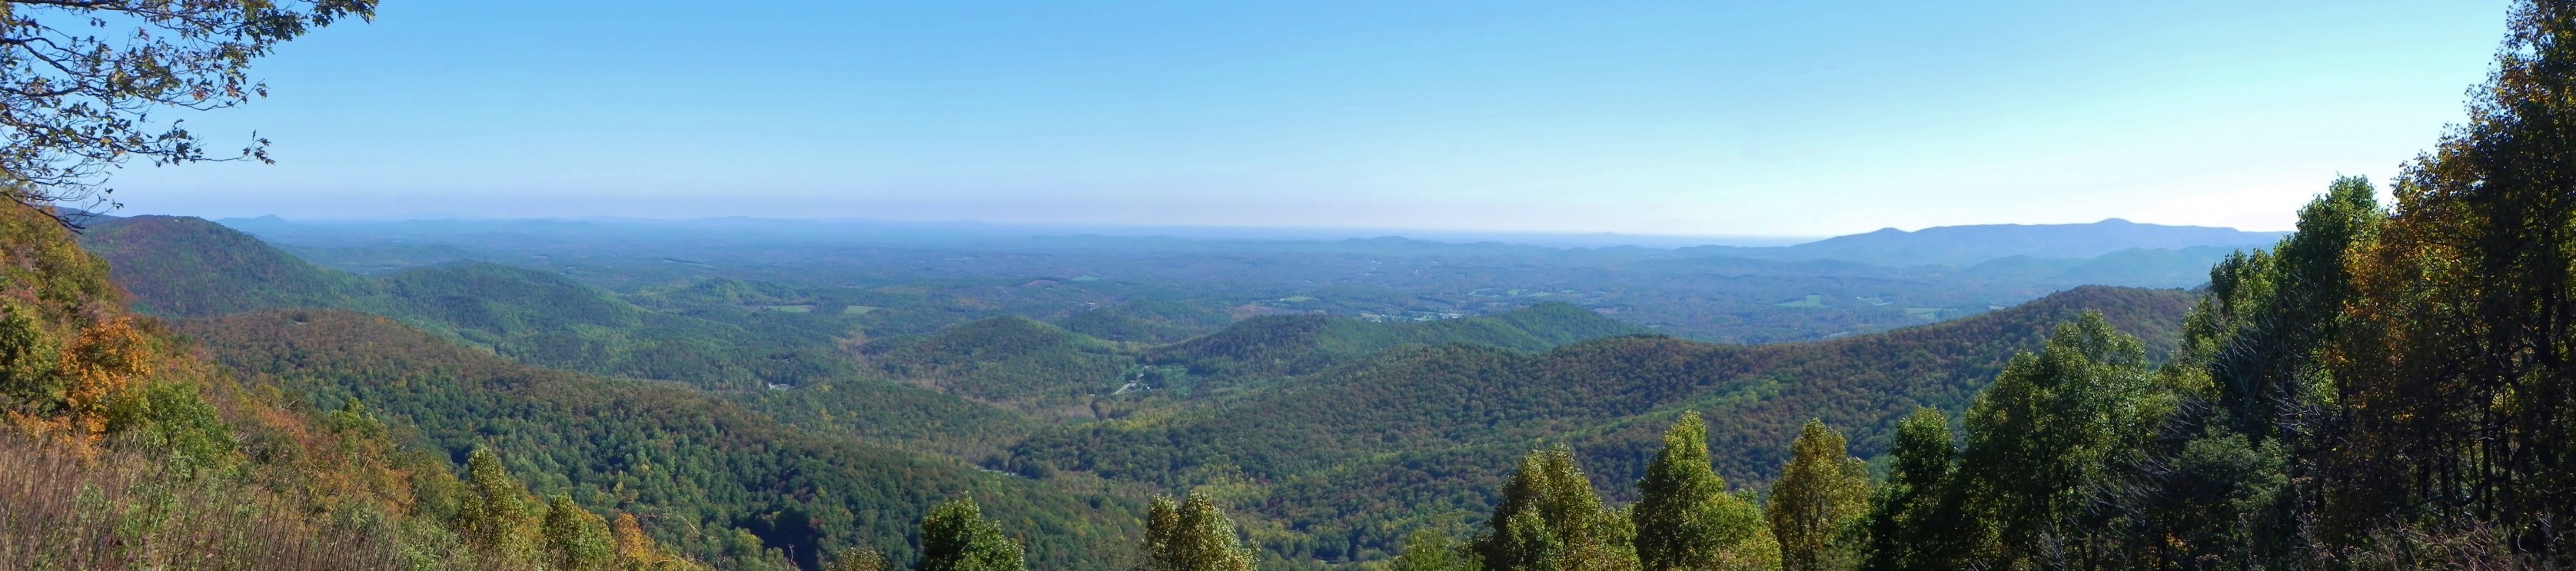 Panoramic View from Saddle Overlook, Rocky Knob, October 17, 2014. Image courtesy of Catherine Cranfill.